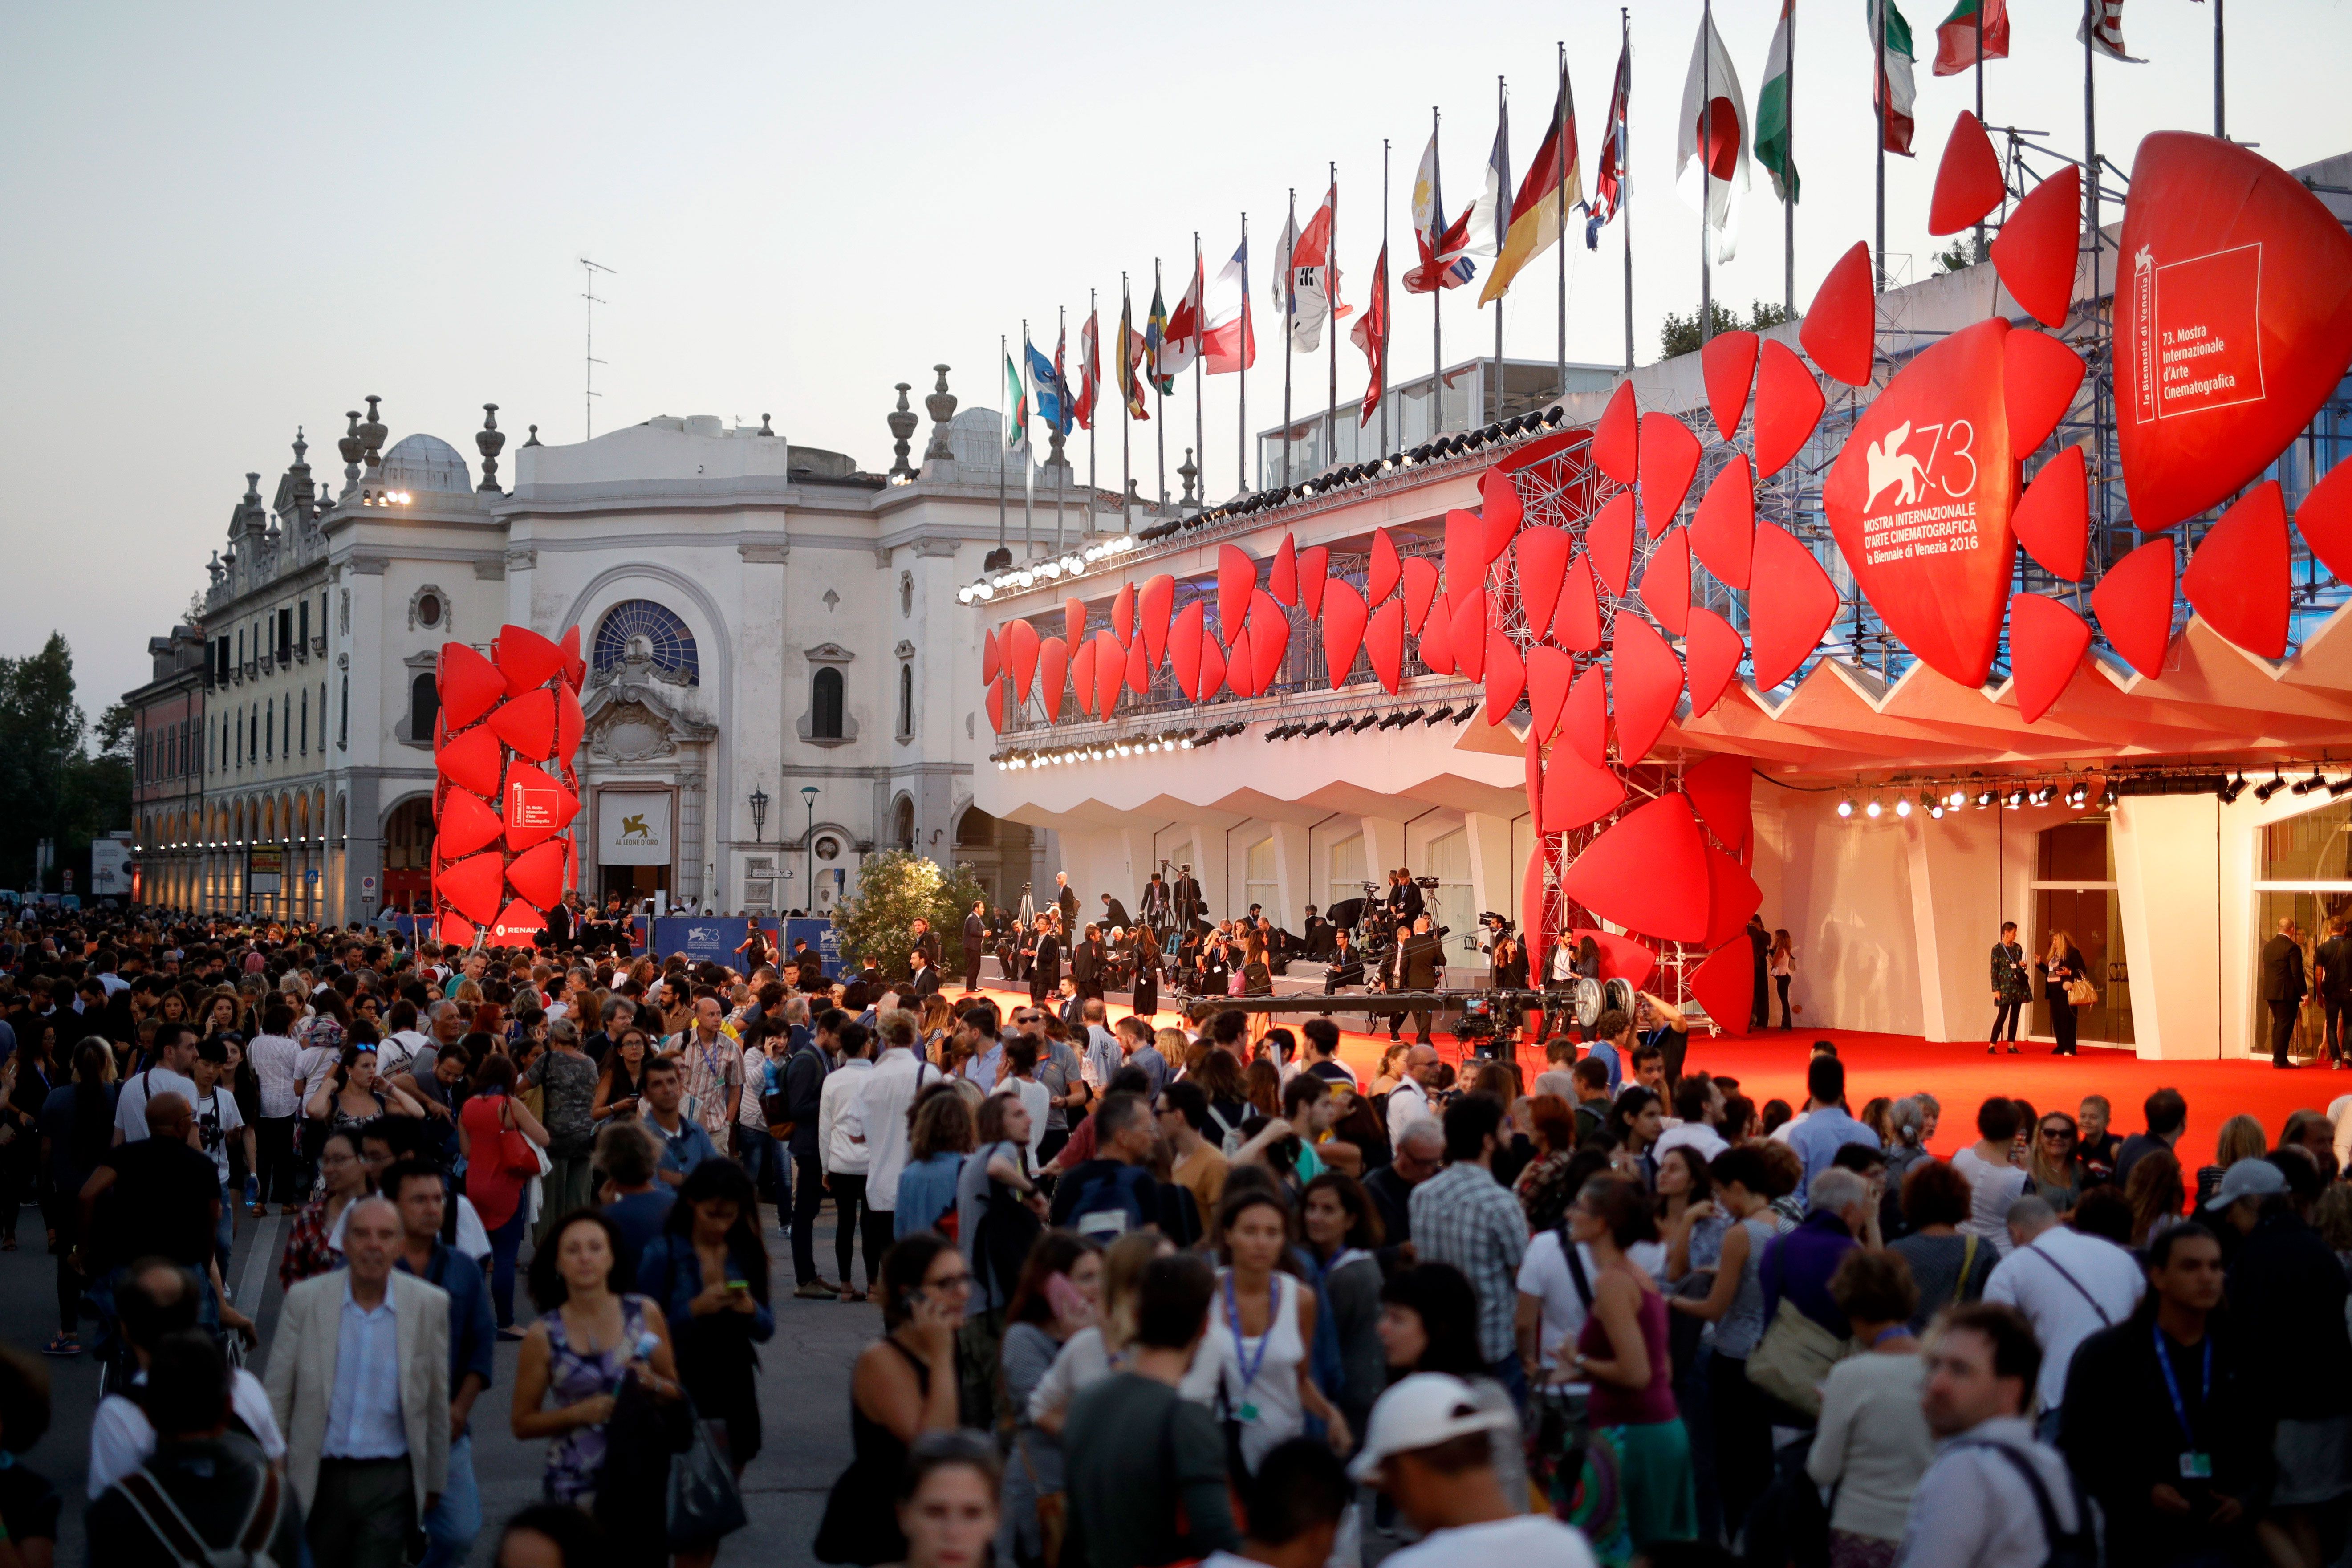 Venice Film Festival 2020 Has No Plan to Partner With Cannes